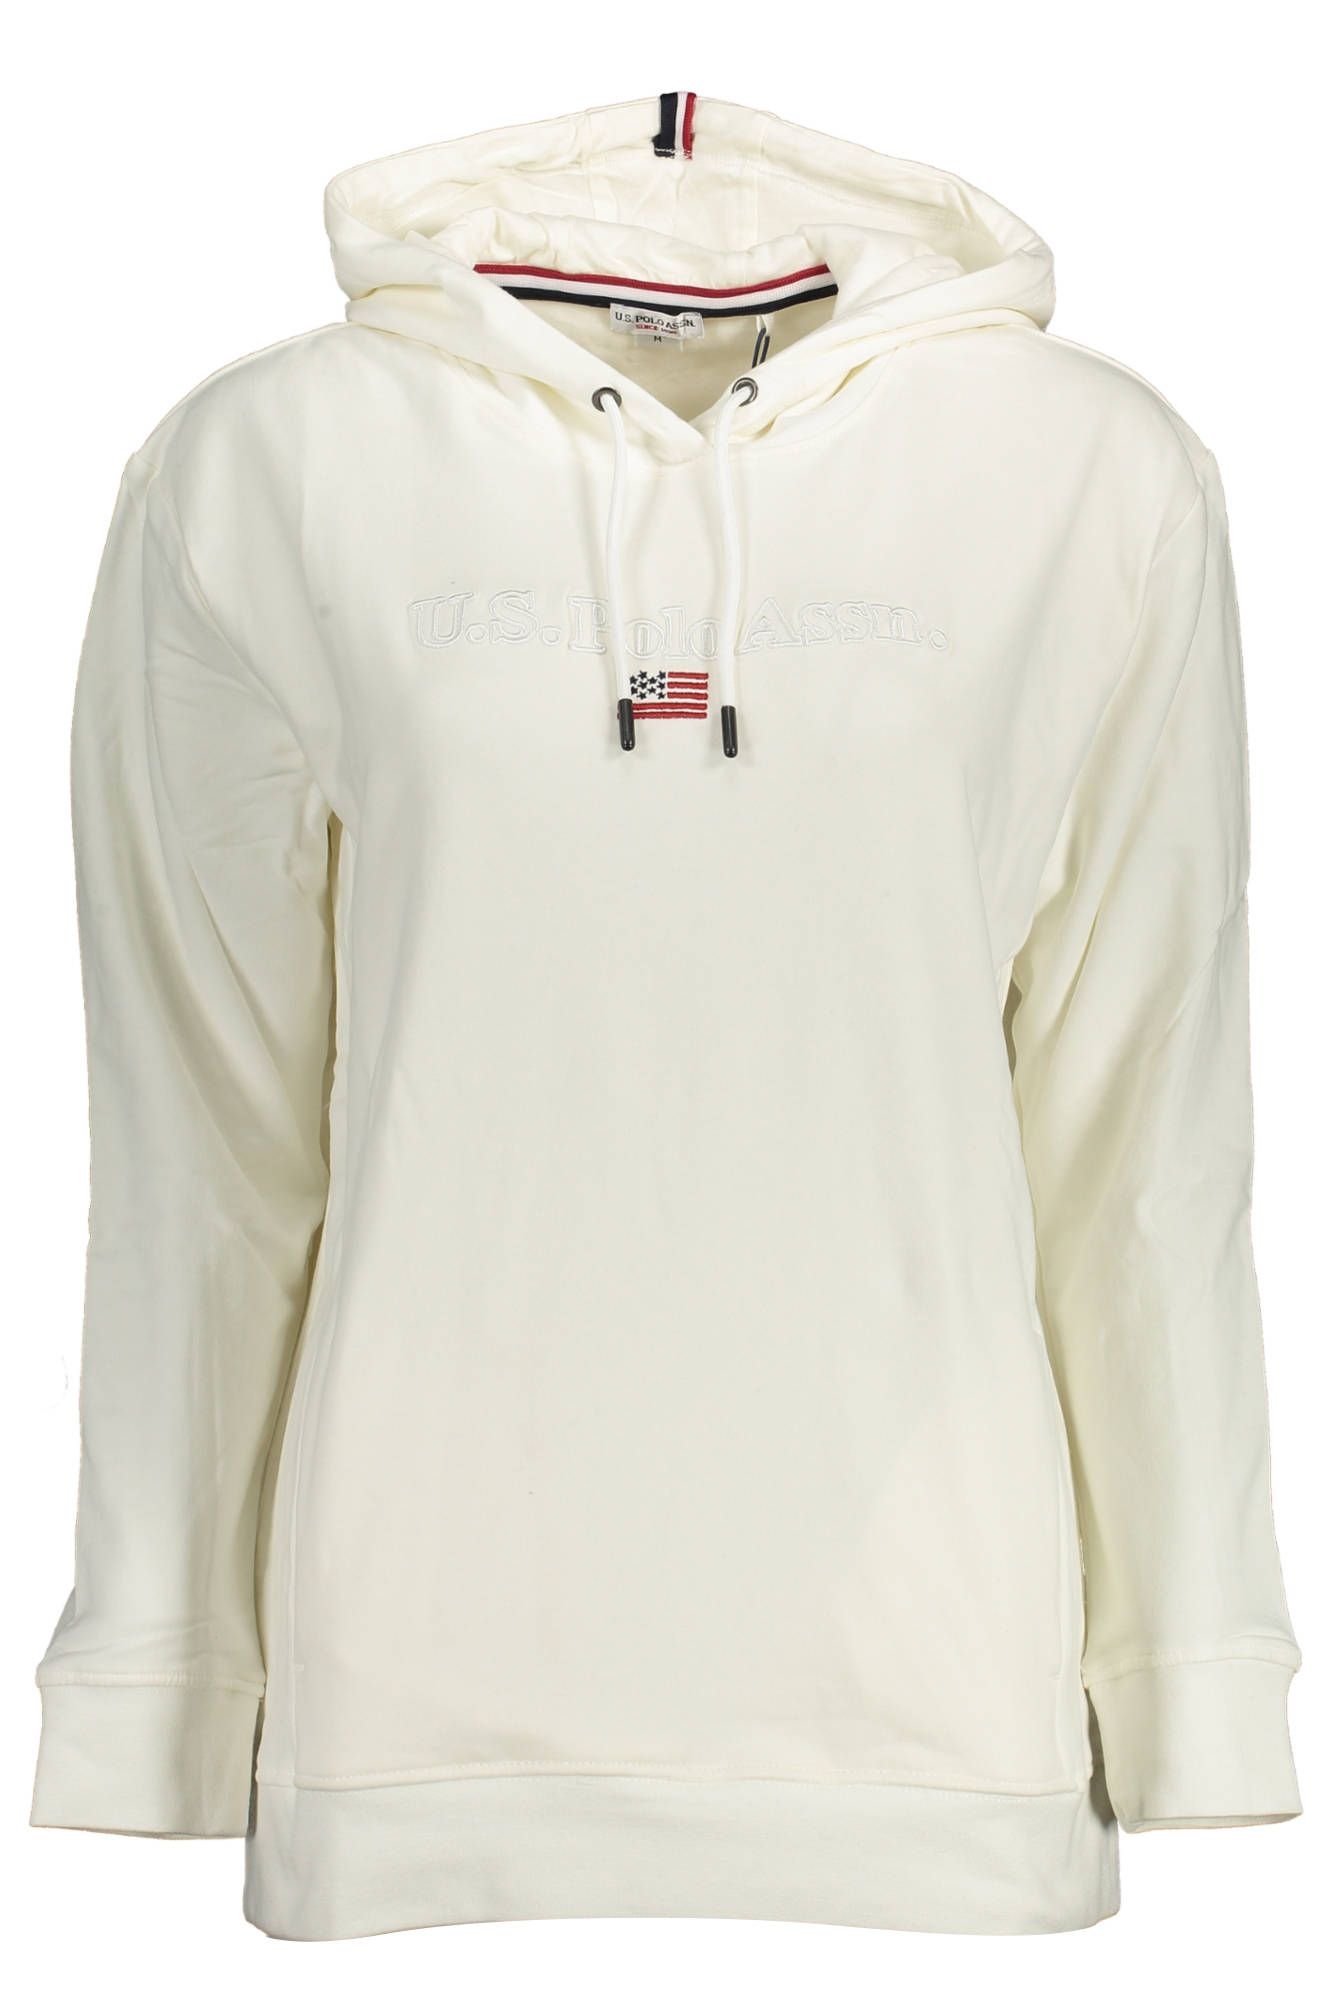 U.S. POLO ASSN. Chic White Hooded Sweatshirt with Embroidery